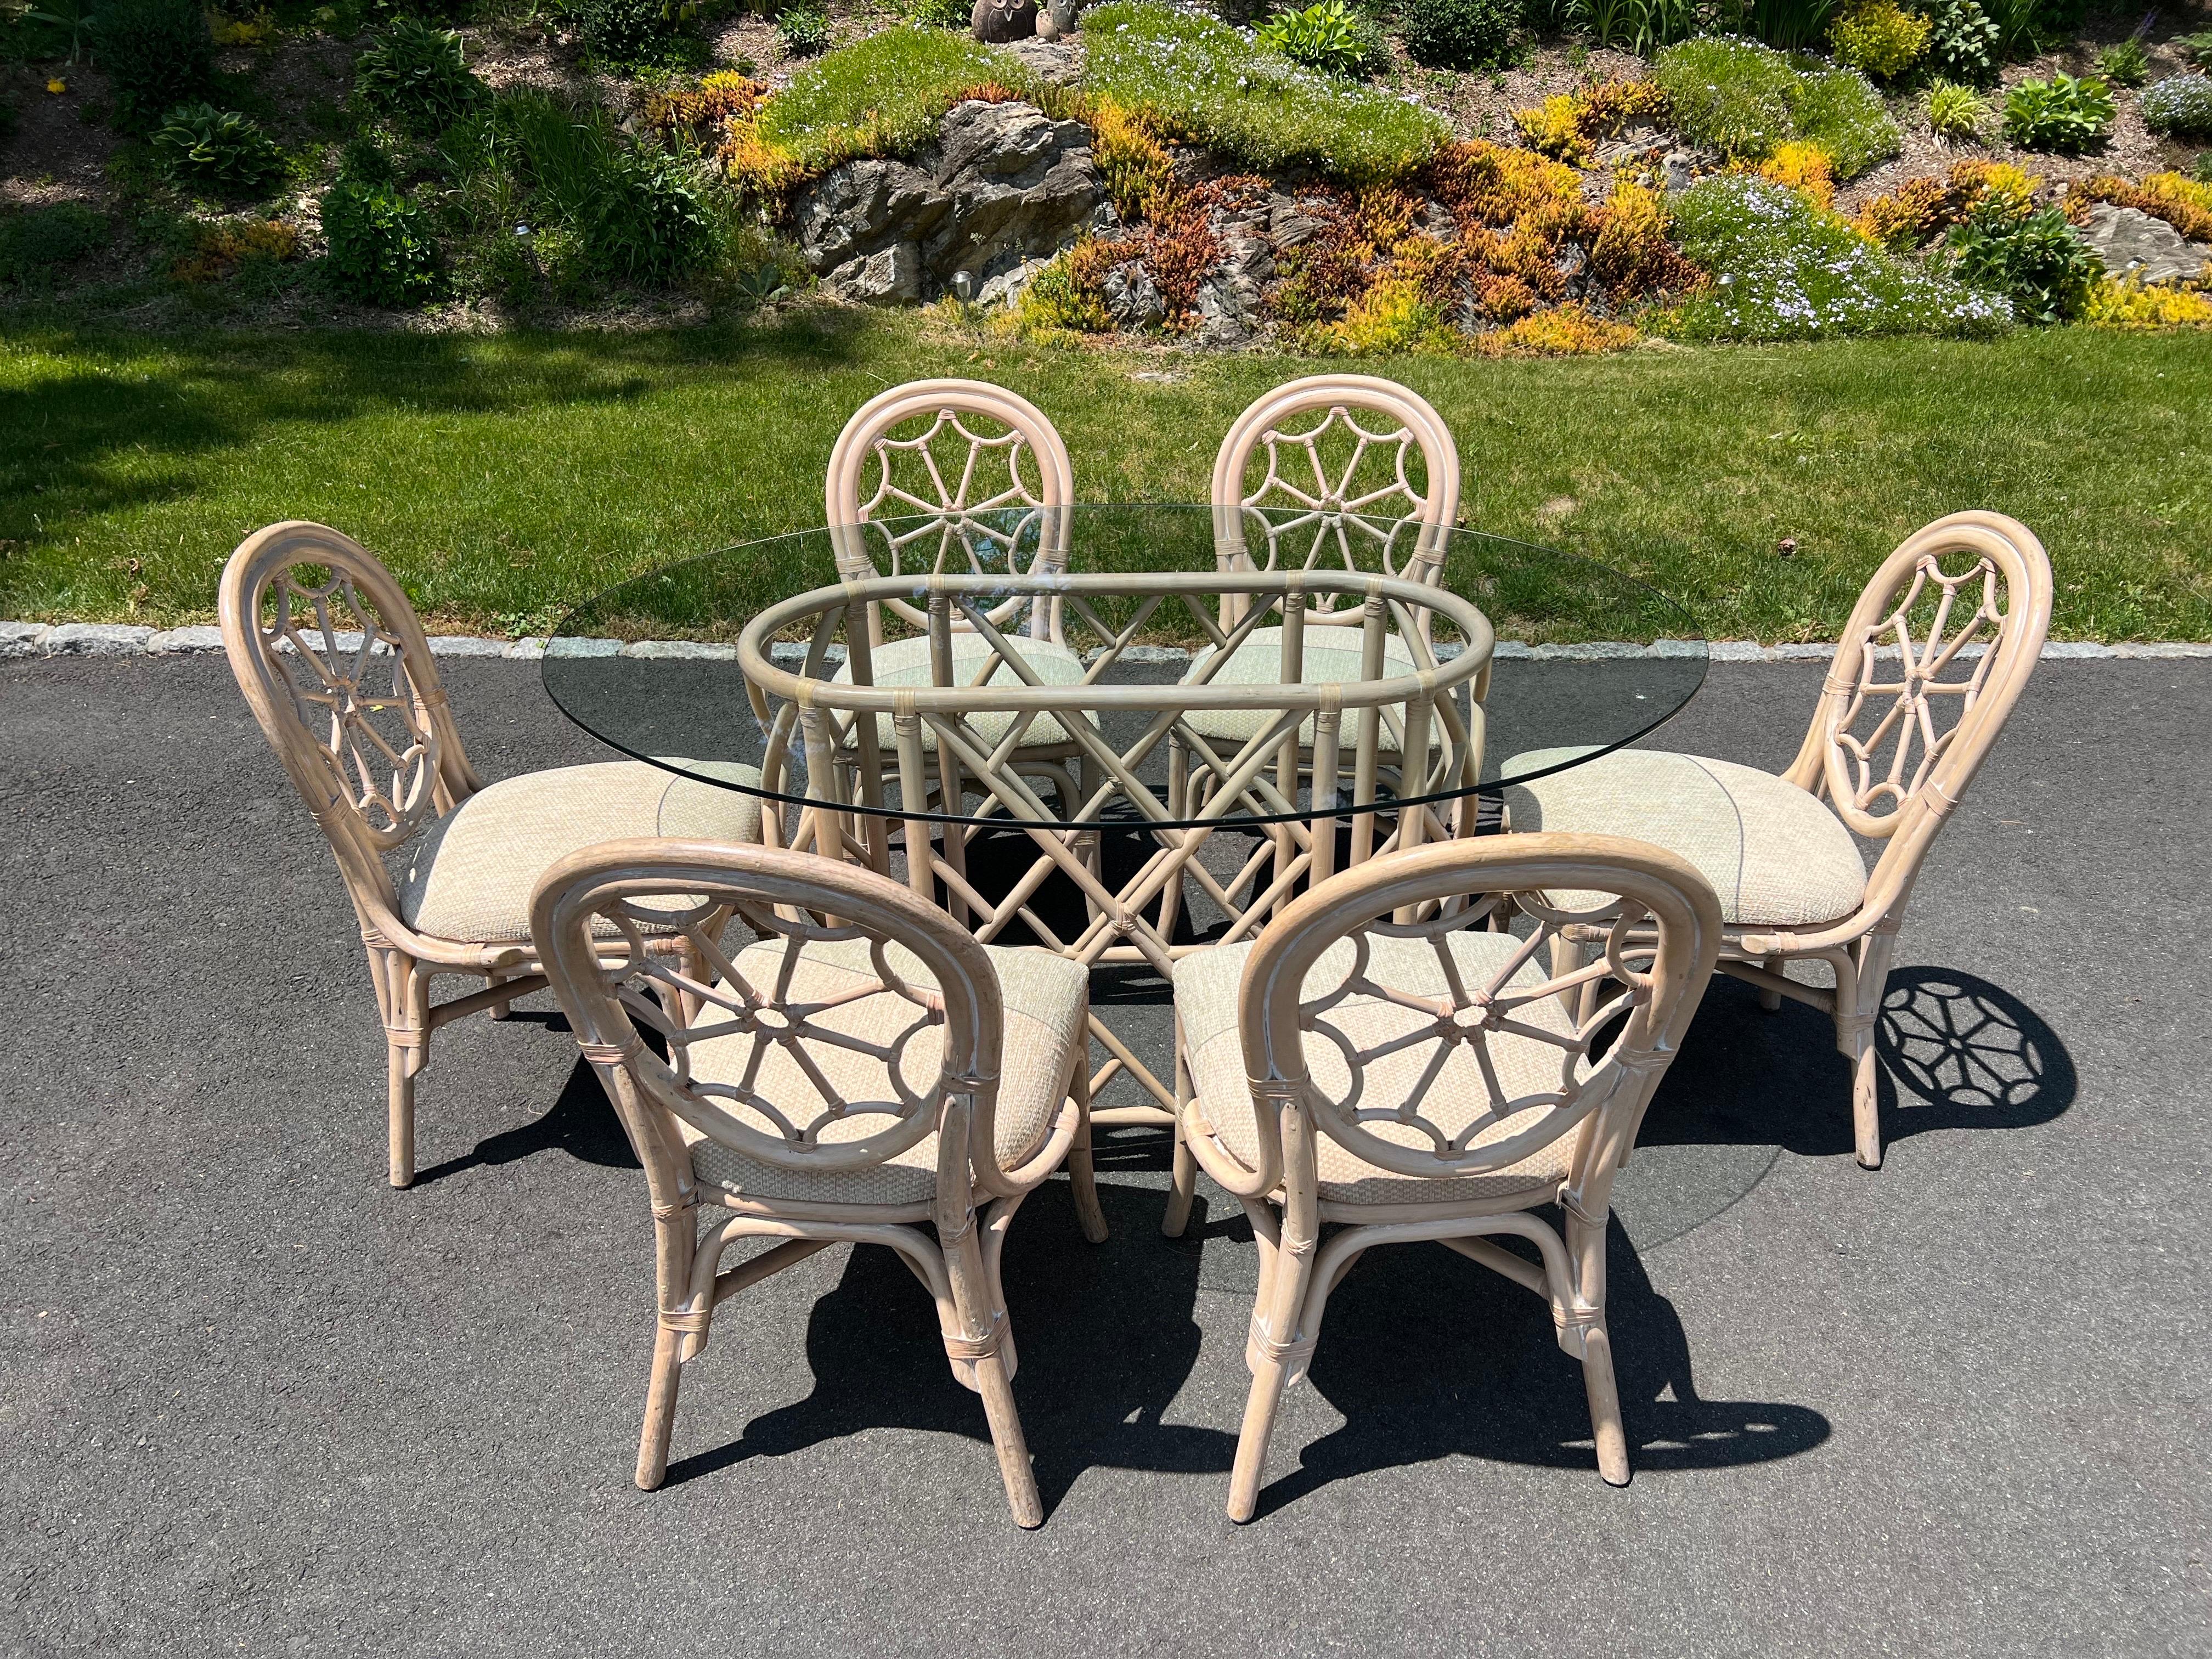 Palm Beach Rattan Dining Set with Six Chairs. Amazing cobweb designed back to these sculptural chairs. Covered in a neutral oatmeal chenille. Large oval glass top sits above the intricate chinoiserie designed oval base. The existing glass top is a